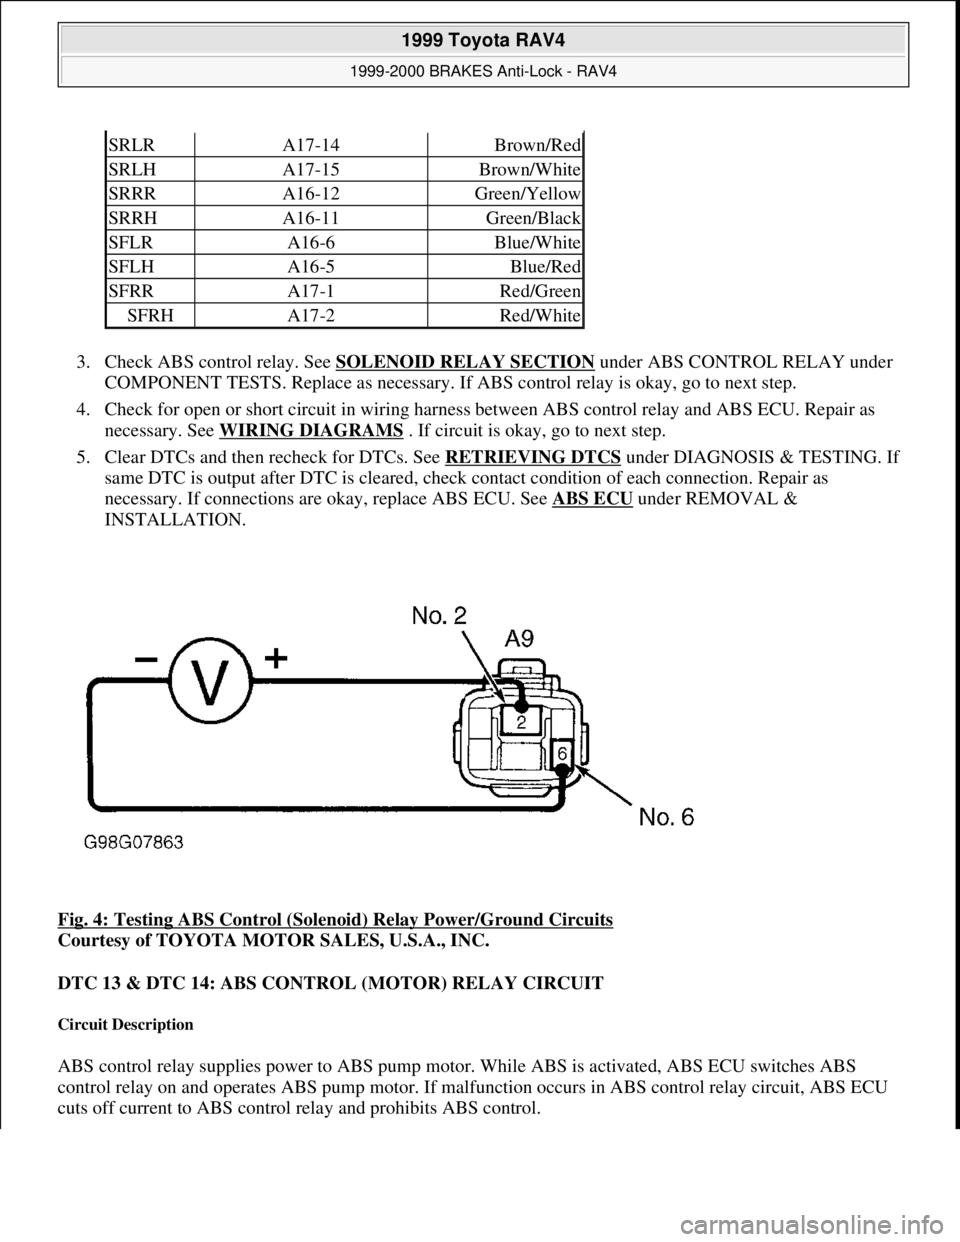 TOYOTA RAV4 1996  Service Repair Manual 3. Check ABS control relay. See SOLENOID RELAY SECTION under ABS CONTROL RELAY under 
COMPONENT TESTS. Replace as necessary. If ABS control relay is okay, go to next step.  
4. Check for open or short